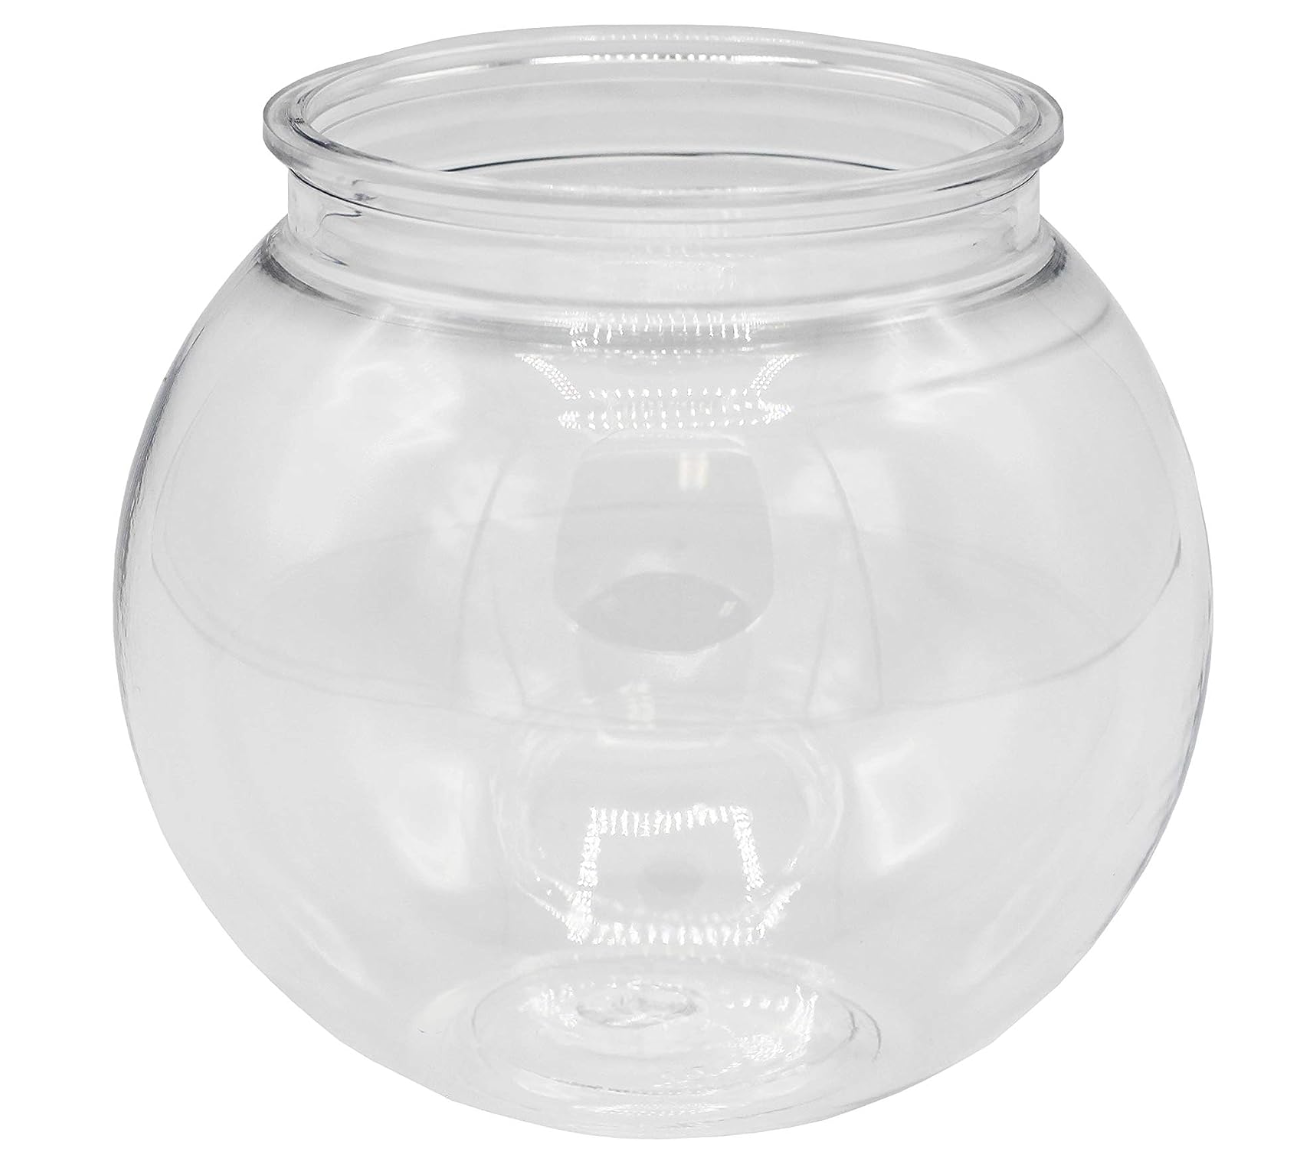 Small Fishbowl for Open Air Terrariums or Water Gardens